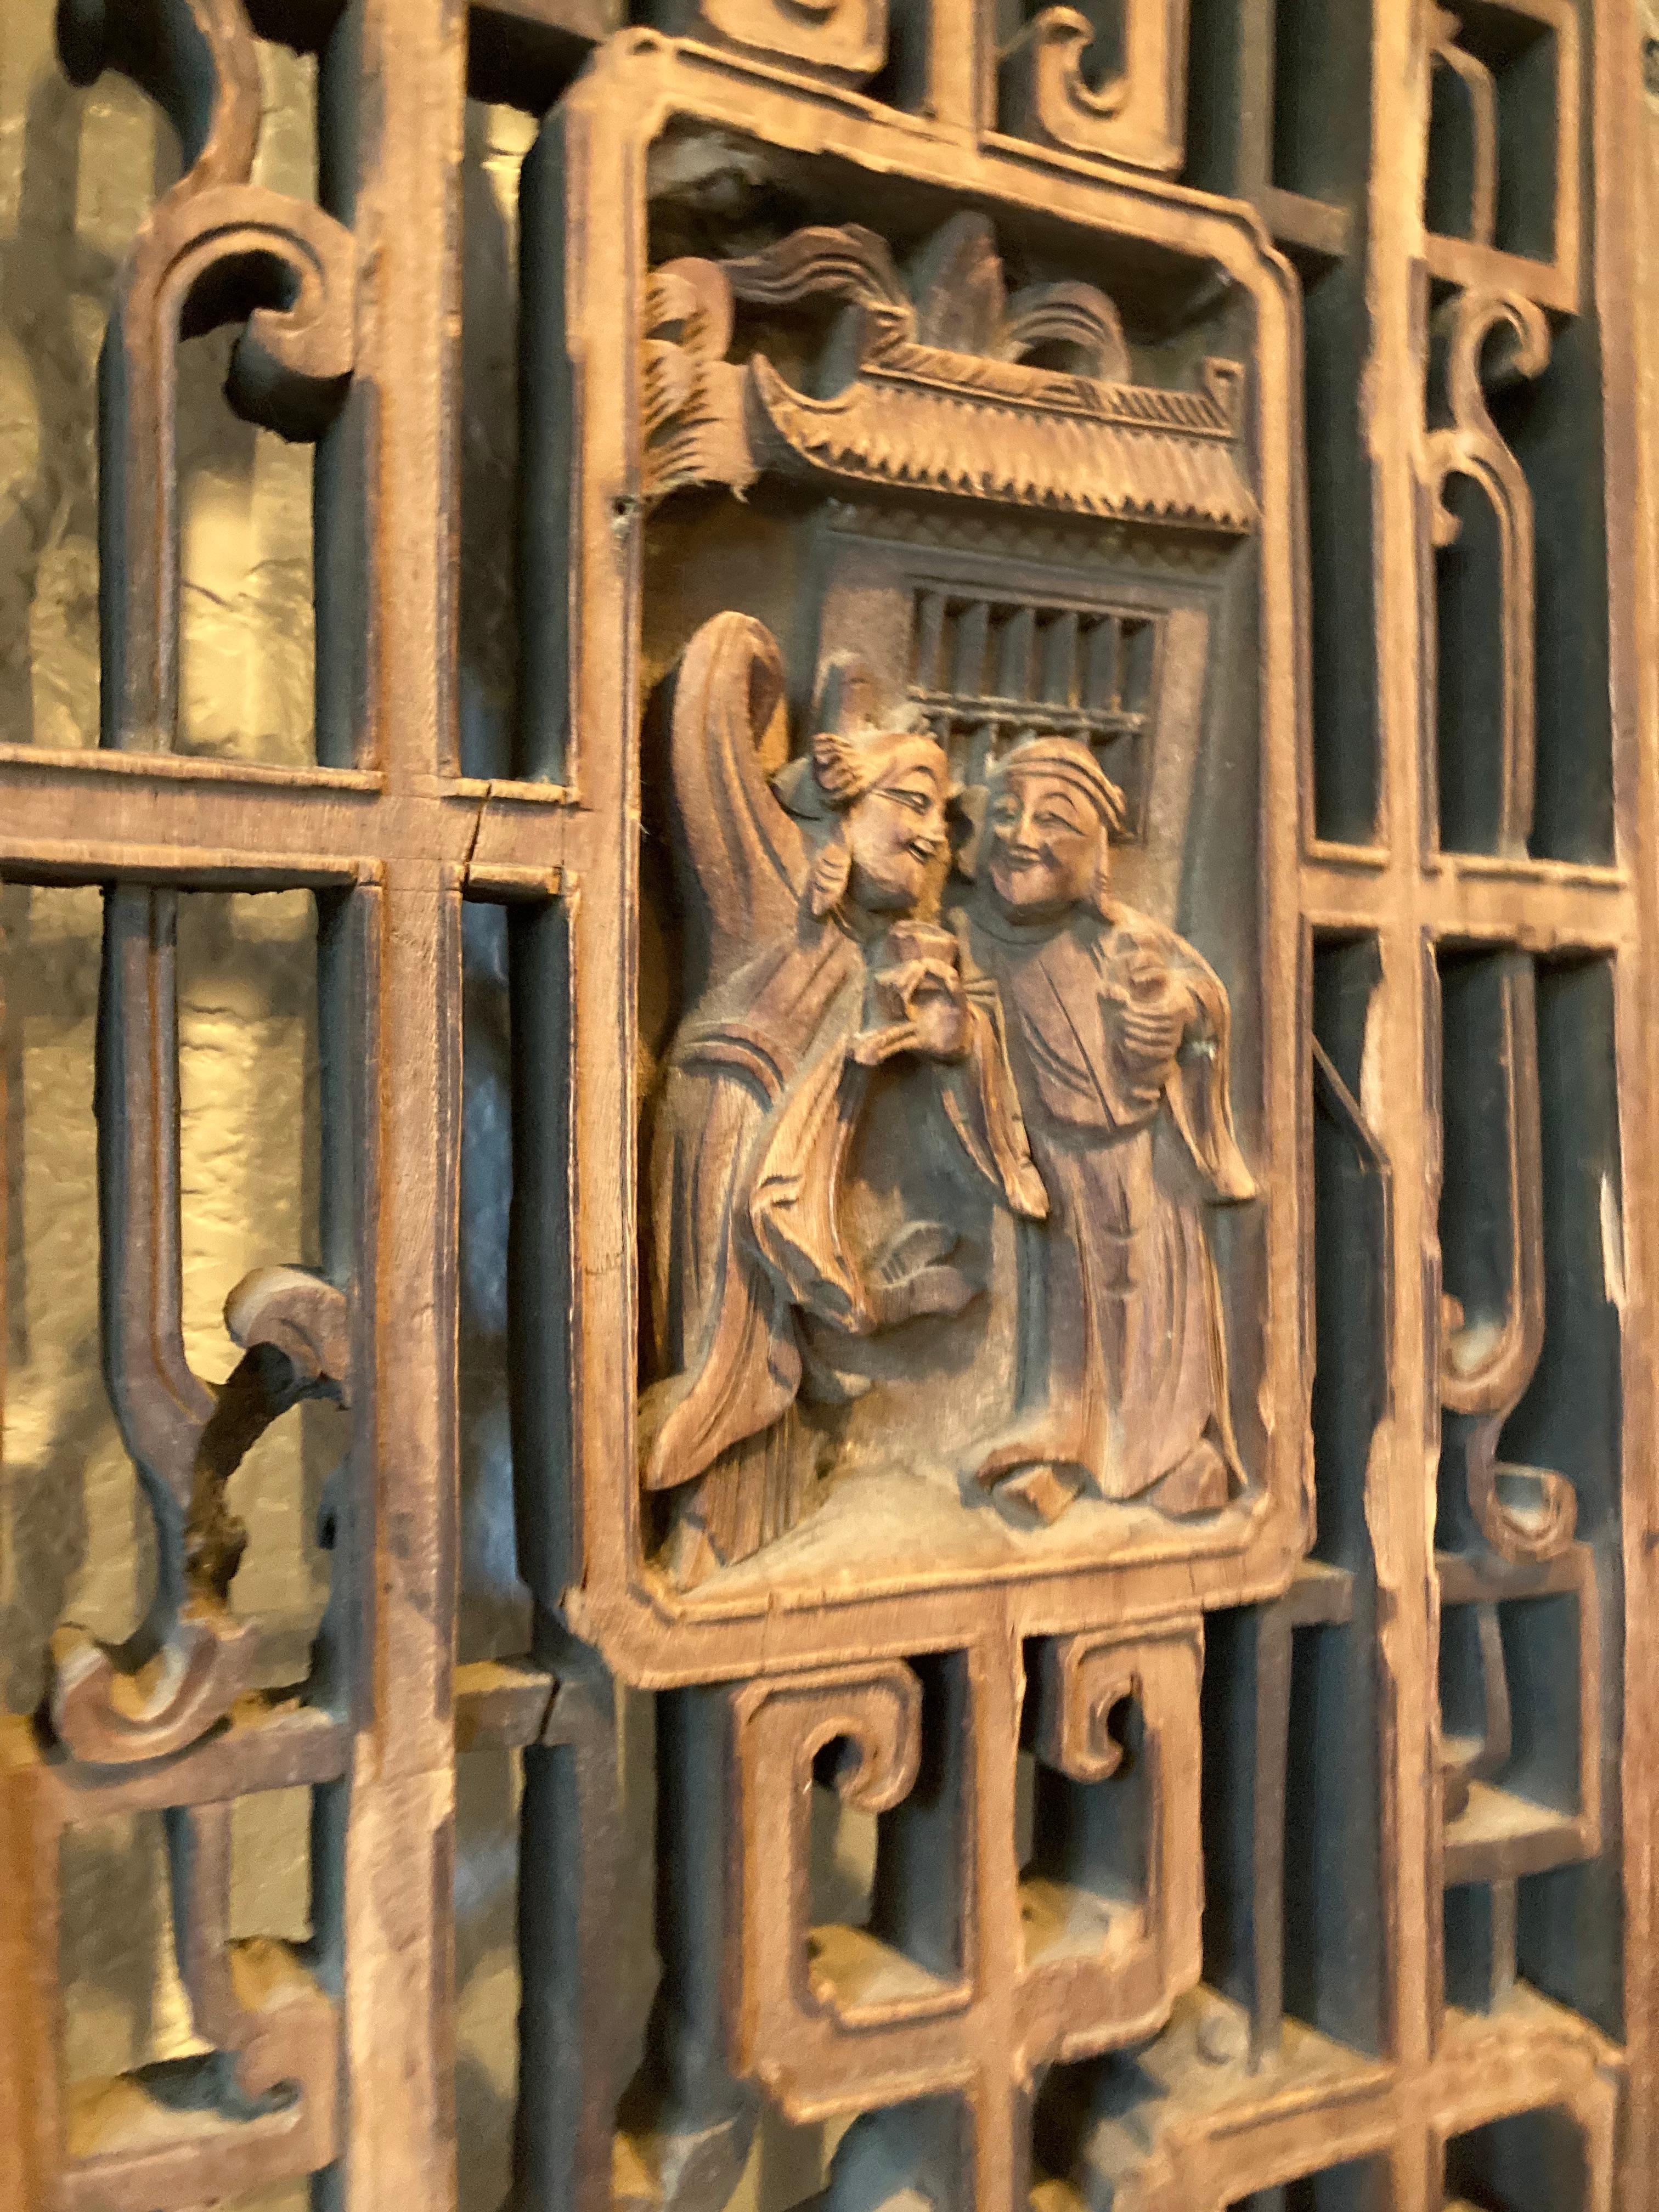 Framed panel with mitered mortise and tenon joints. Panes include openwork and relief carvings, with personage motifs.